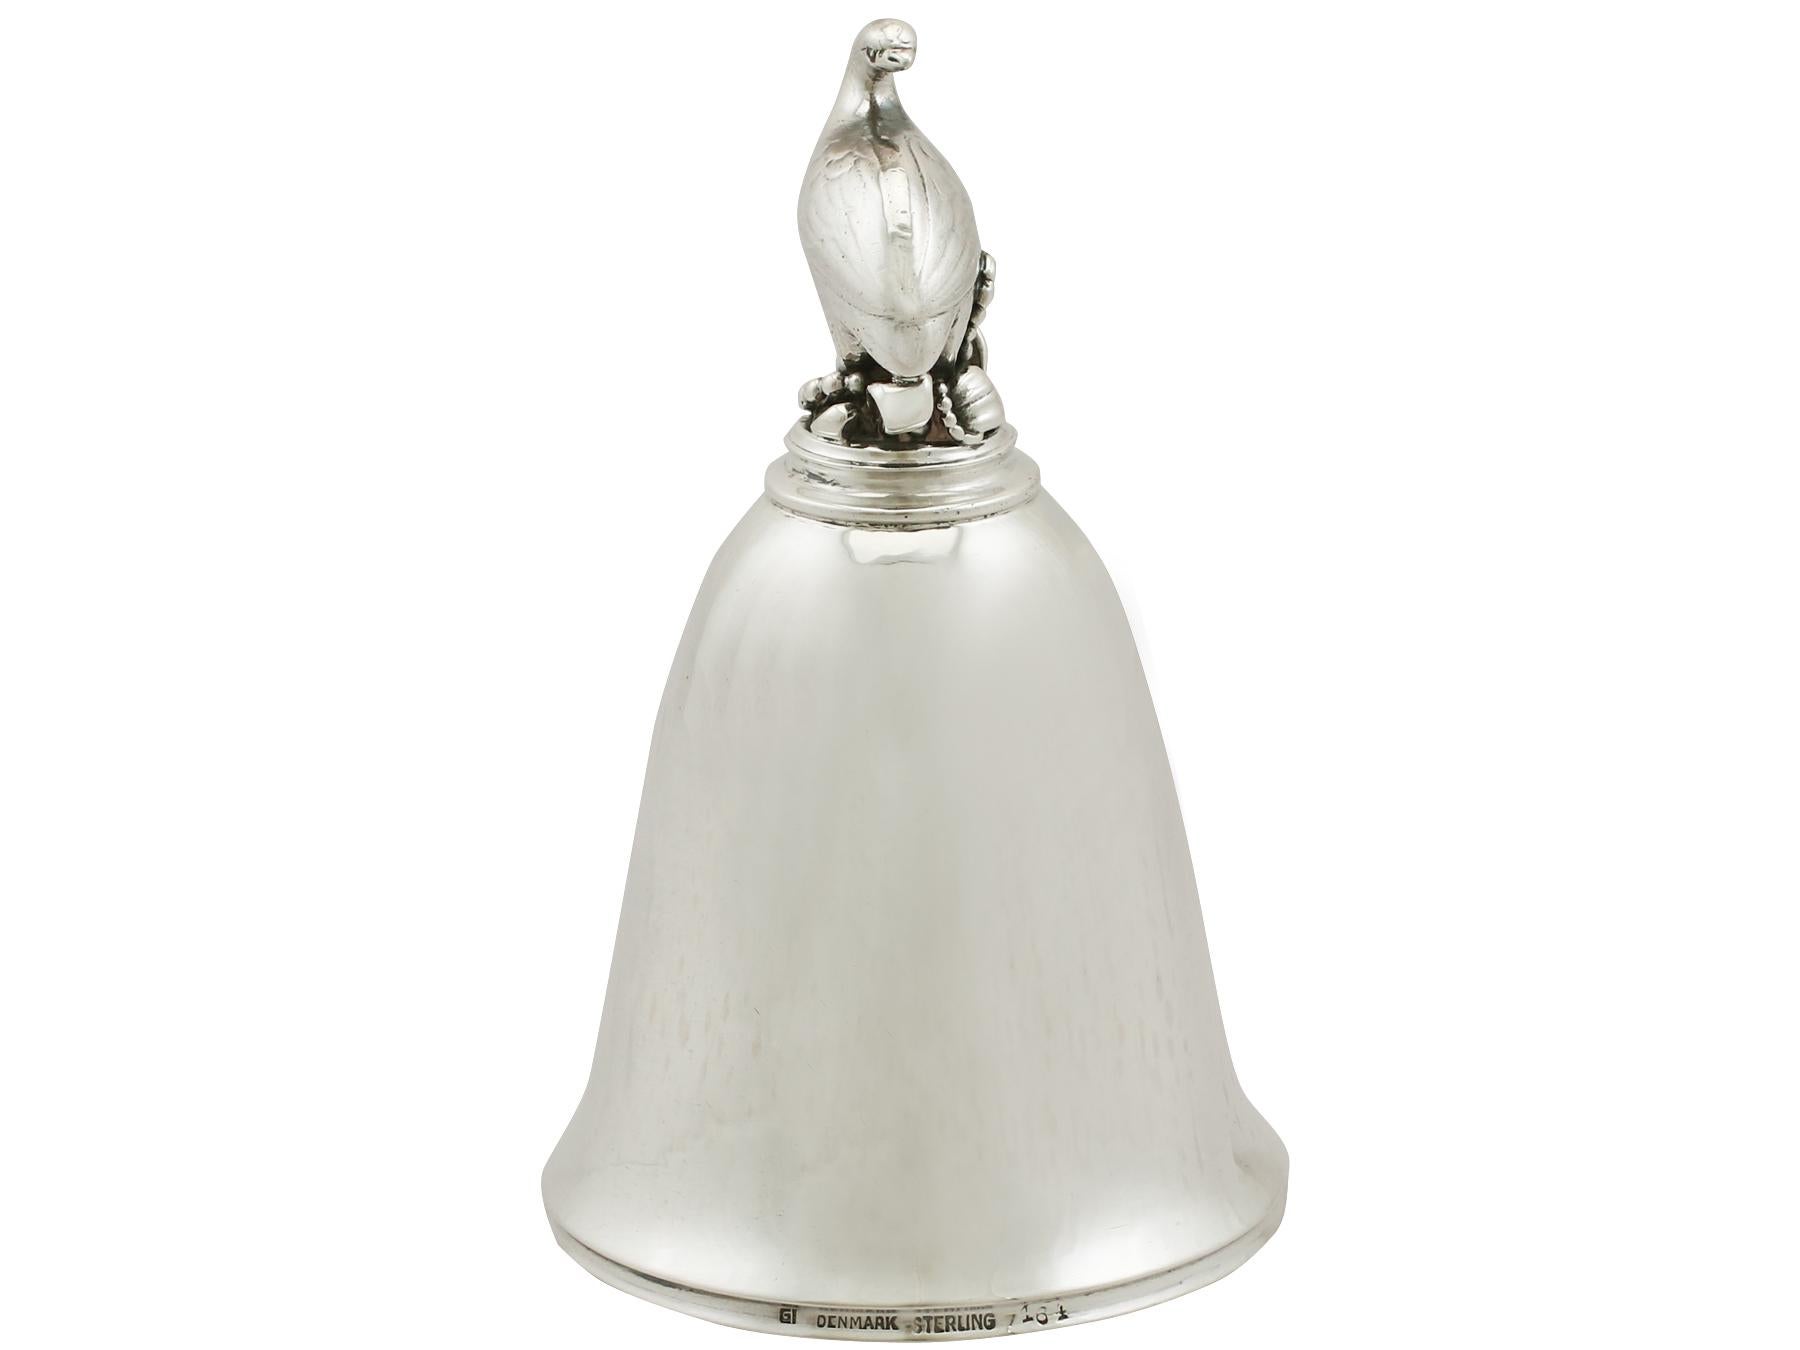 An exceptional, fine and impressive antique Danish sterling silver table bell in the Arts & Crafts style; an addition to our range of ornamental silverware.

This exceptional antique Danish sterling silver table bell has a plain bell shaped